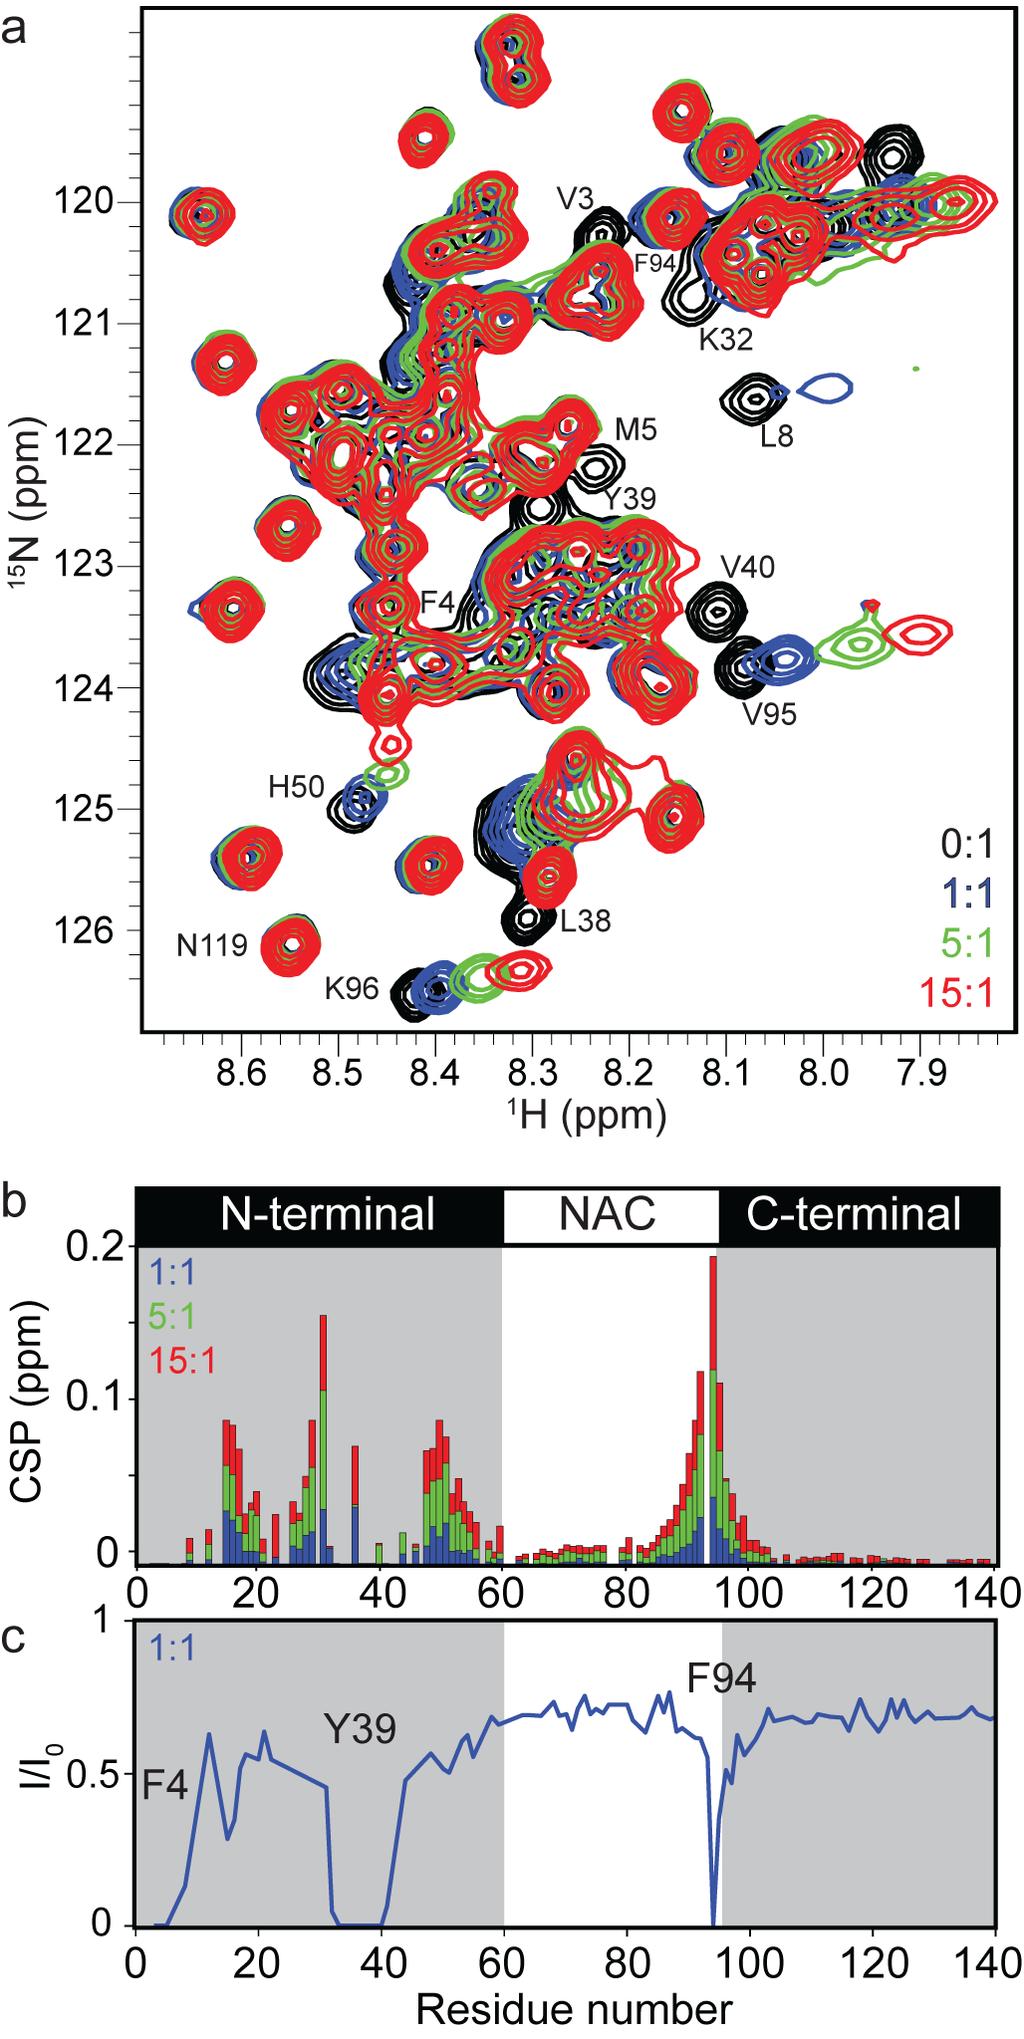 Figure S1. Interaction of PcTS with αsyn. (a) 1 H- 15 N HSQC NMR spectra of 100 µm αsyn in the absence (0:1, black) and increasing equivalent concentrations of PcTS (100 µm, blue; 500 µm, green; 1.